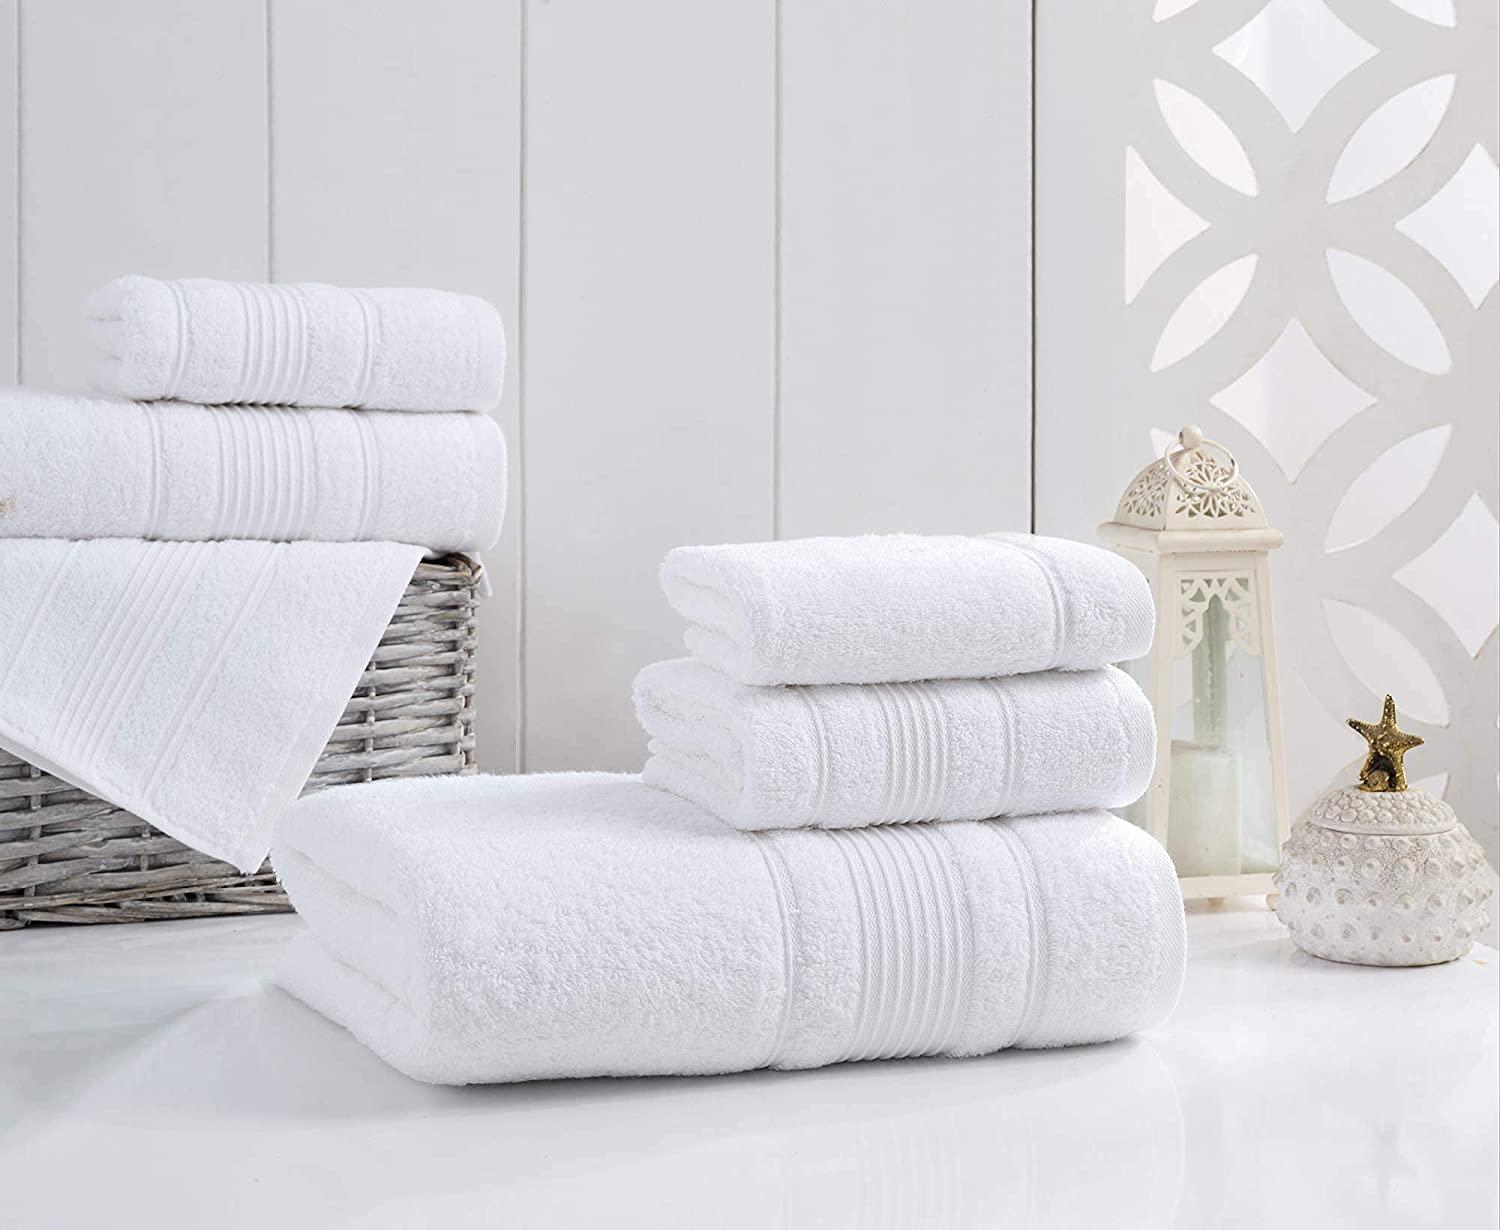 4-Piece Hand Towels Set  100% Turkish Cotton, Spa & Hotel Towels Quality,  Quick Dry Hand Towels for your Bathroom, Shower Towels (Black) 